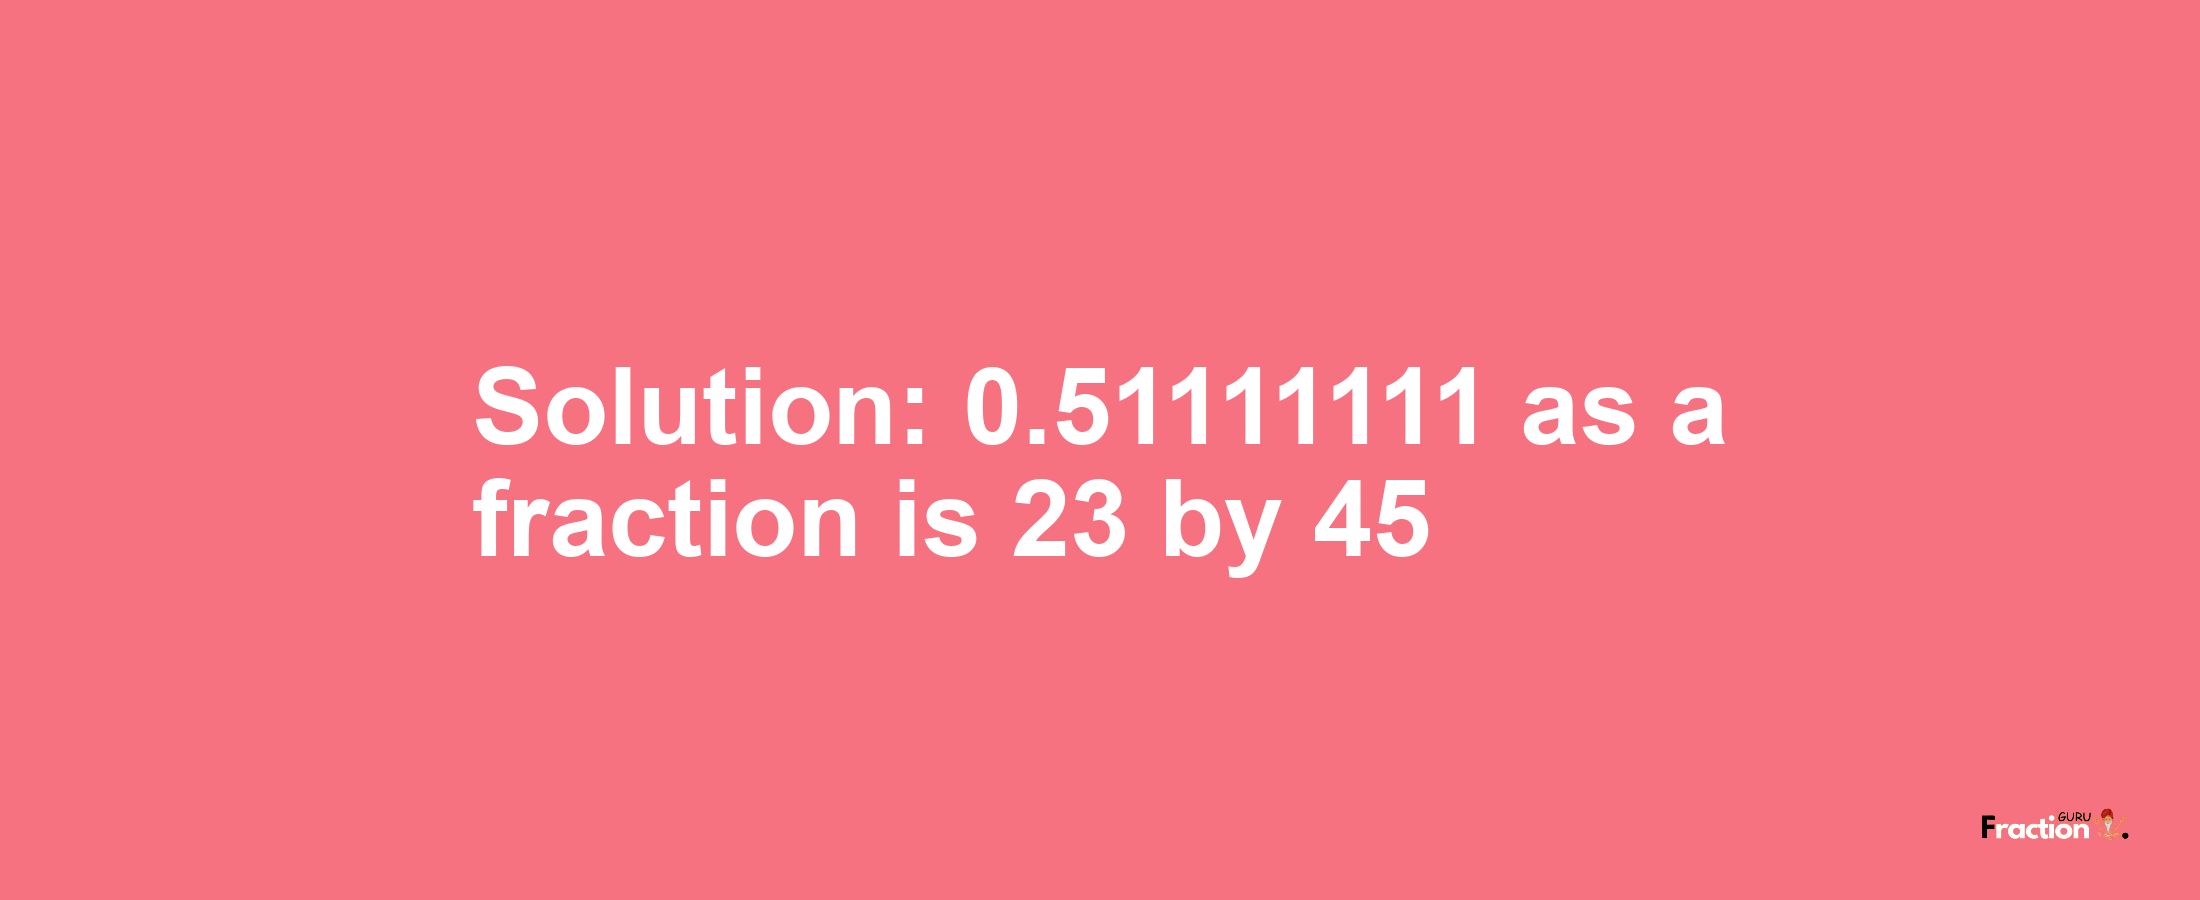 Solution:0.51111111 as a fraction is 23/45